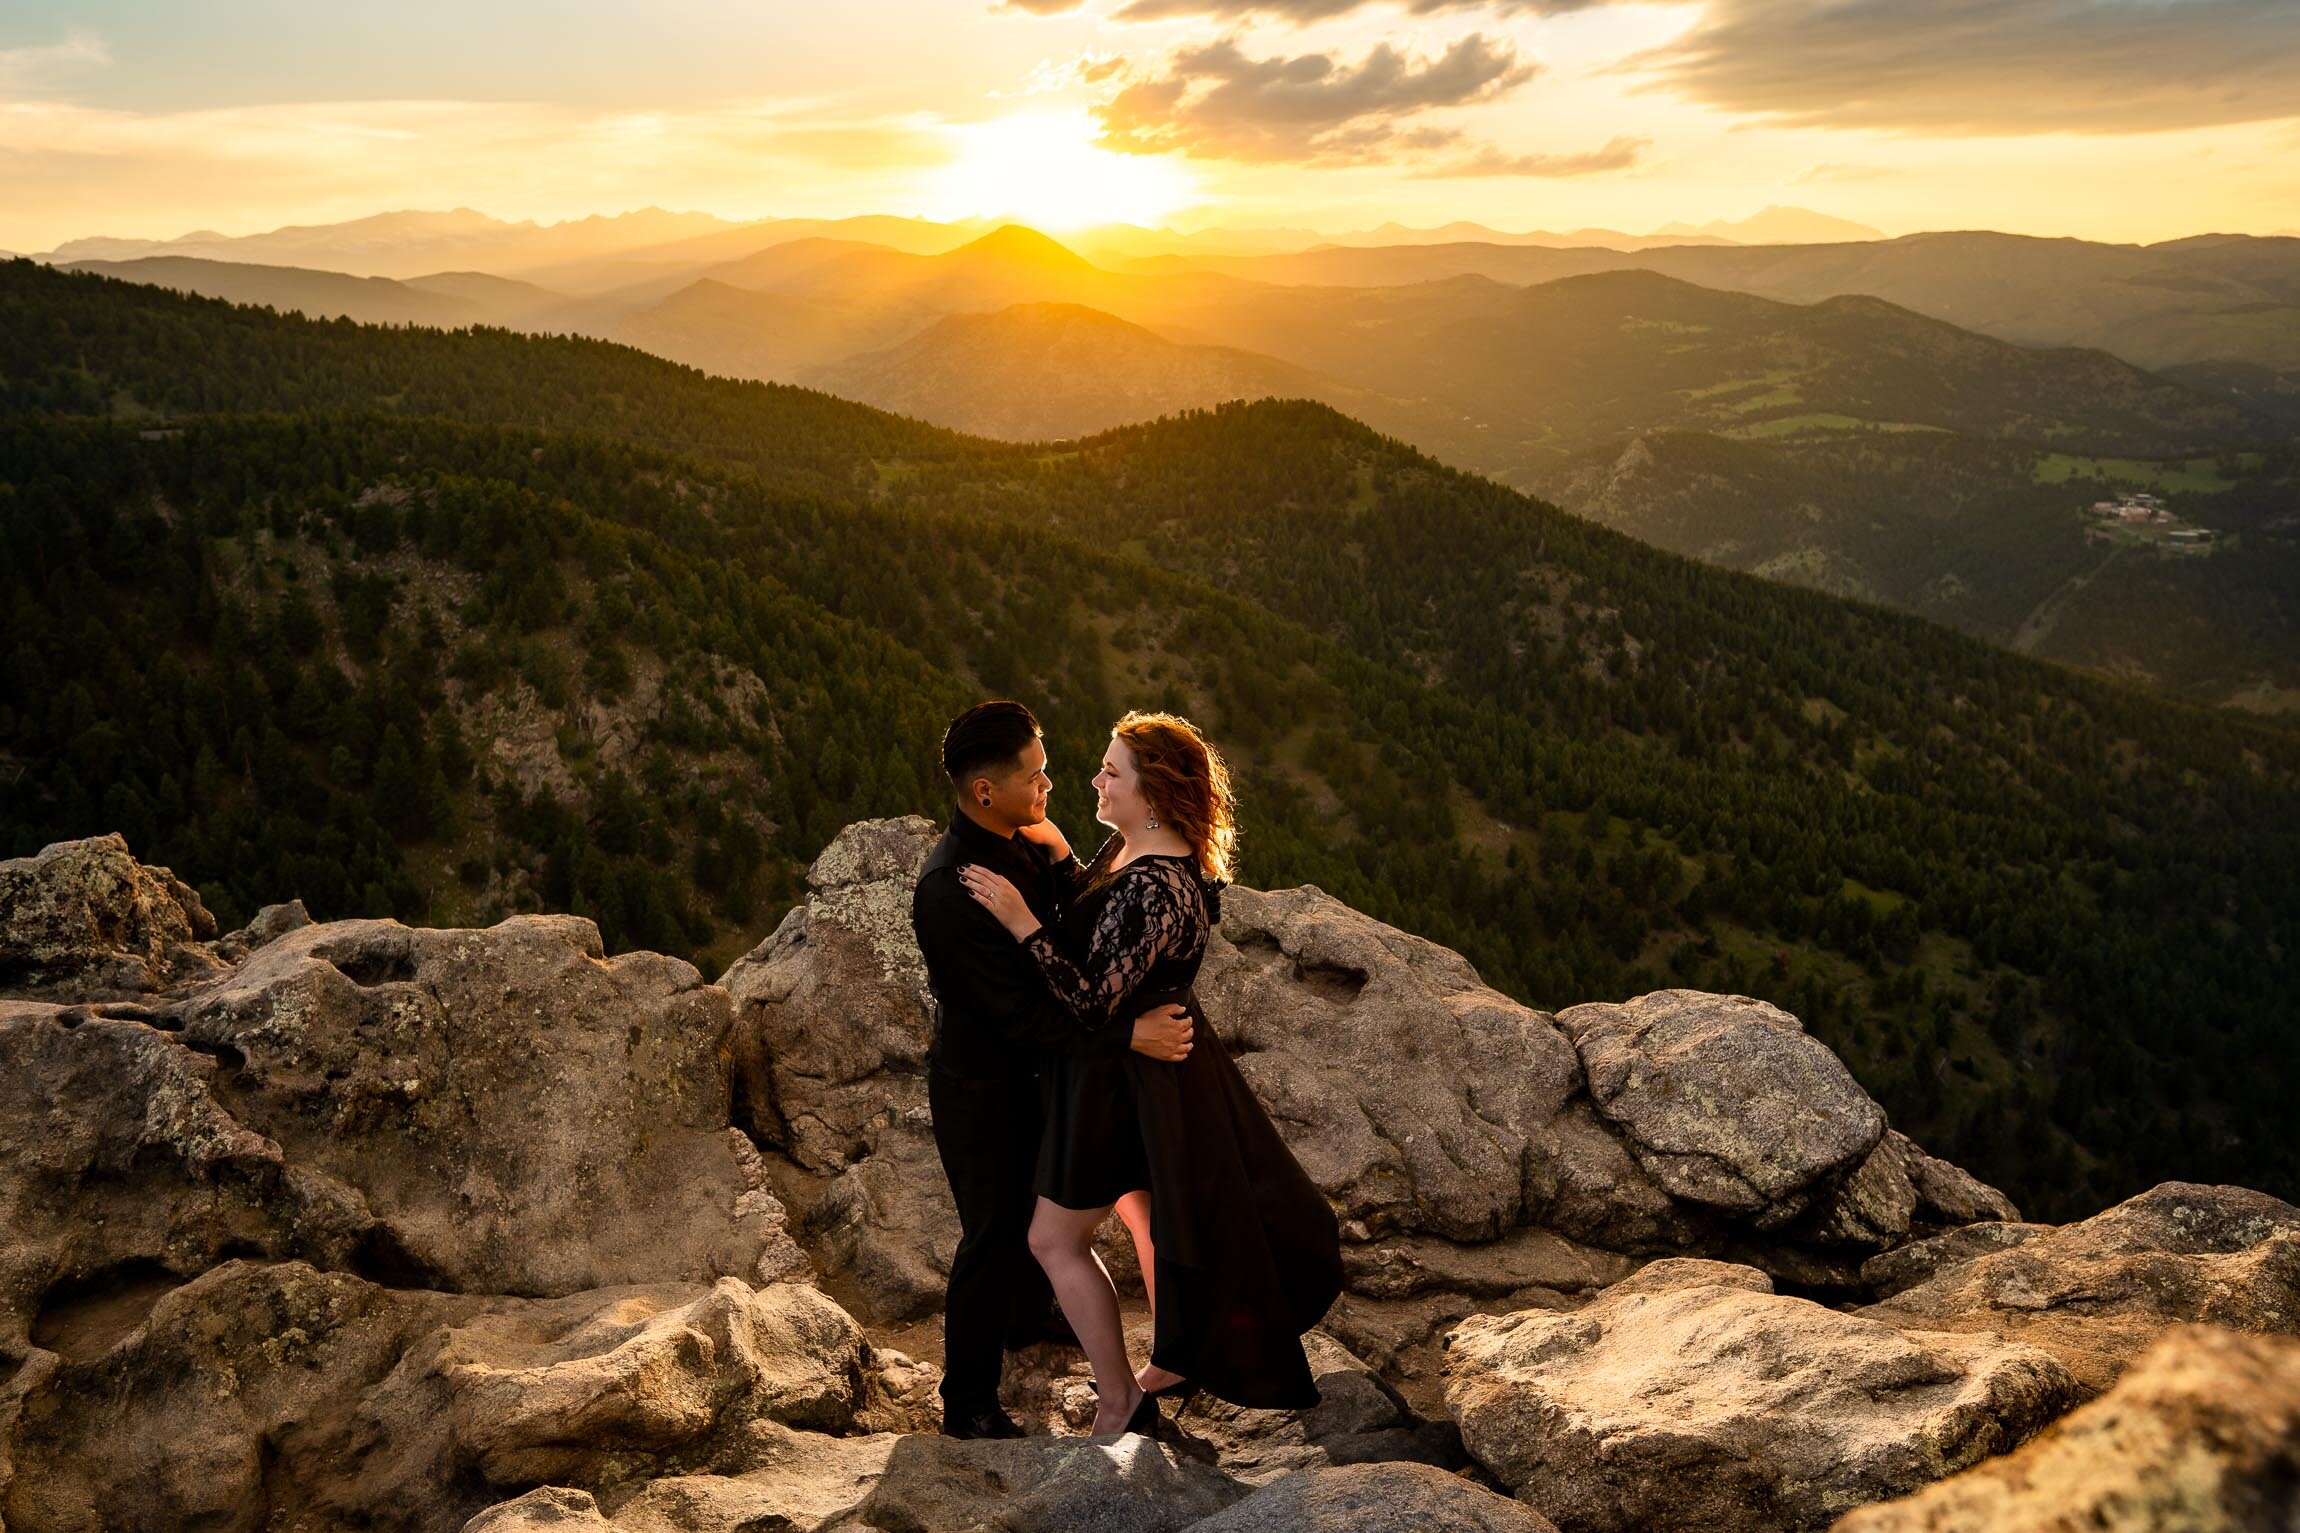 Engaged couple holds hands and watches the sun set from rocky ledge overlooking the mountains, Engagement Session, Sunset Engagement photos, Engagement Photos, Engagement Photos Inspiration, Engagement Photography, Engagement Photographer, Summer Engagement Photos, Mountain Engagement Photos, Lost Gulch Overlook engagement session, Lost Gulch Overlook engagement photos, Lost Gulch Overlook engagement photography, Lost Gulch Overlook engagement photographer, Lost Gulch Overlook  engagement inspiration, Boulder engagement session, Boulder engagement photos, Boulder engagement photography, Boulder engagement photographer, Boulder engagement inspiration, Colorado engagement session, Colorado engagement photos, Colorado engagement photography, Colorado engagement photographer, Colorado engagement inspiration